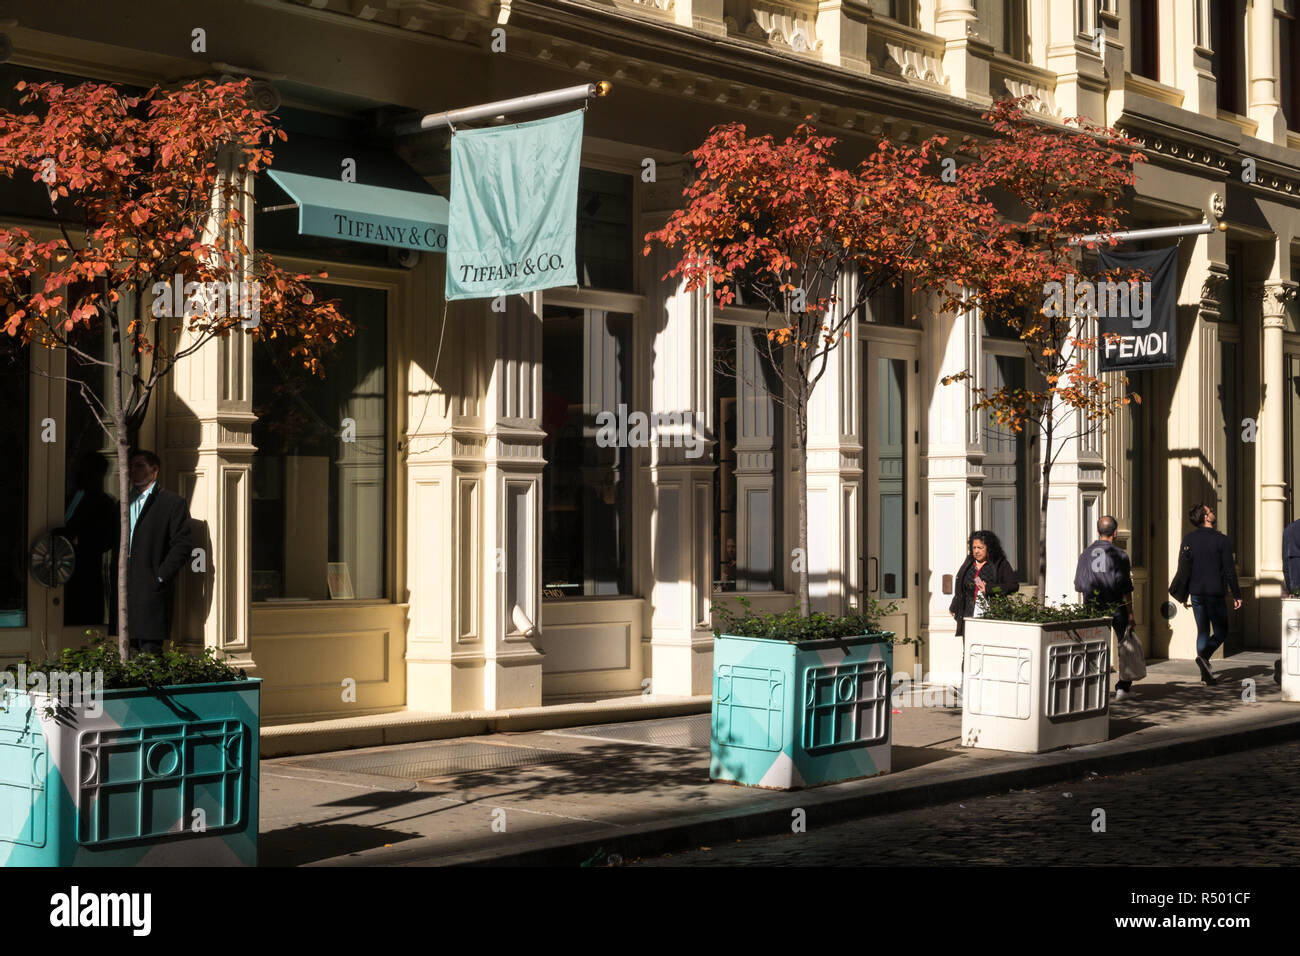 Tiffany & Co. Opens a New Boutique in SoHo